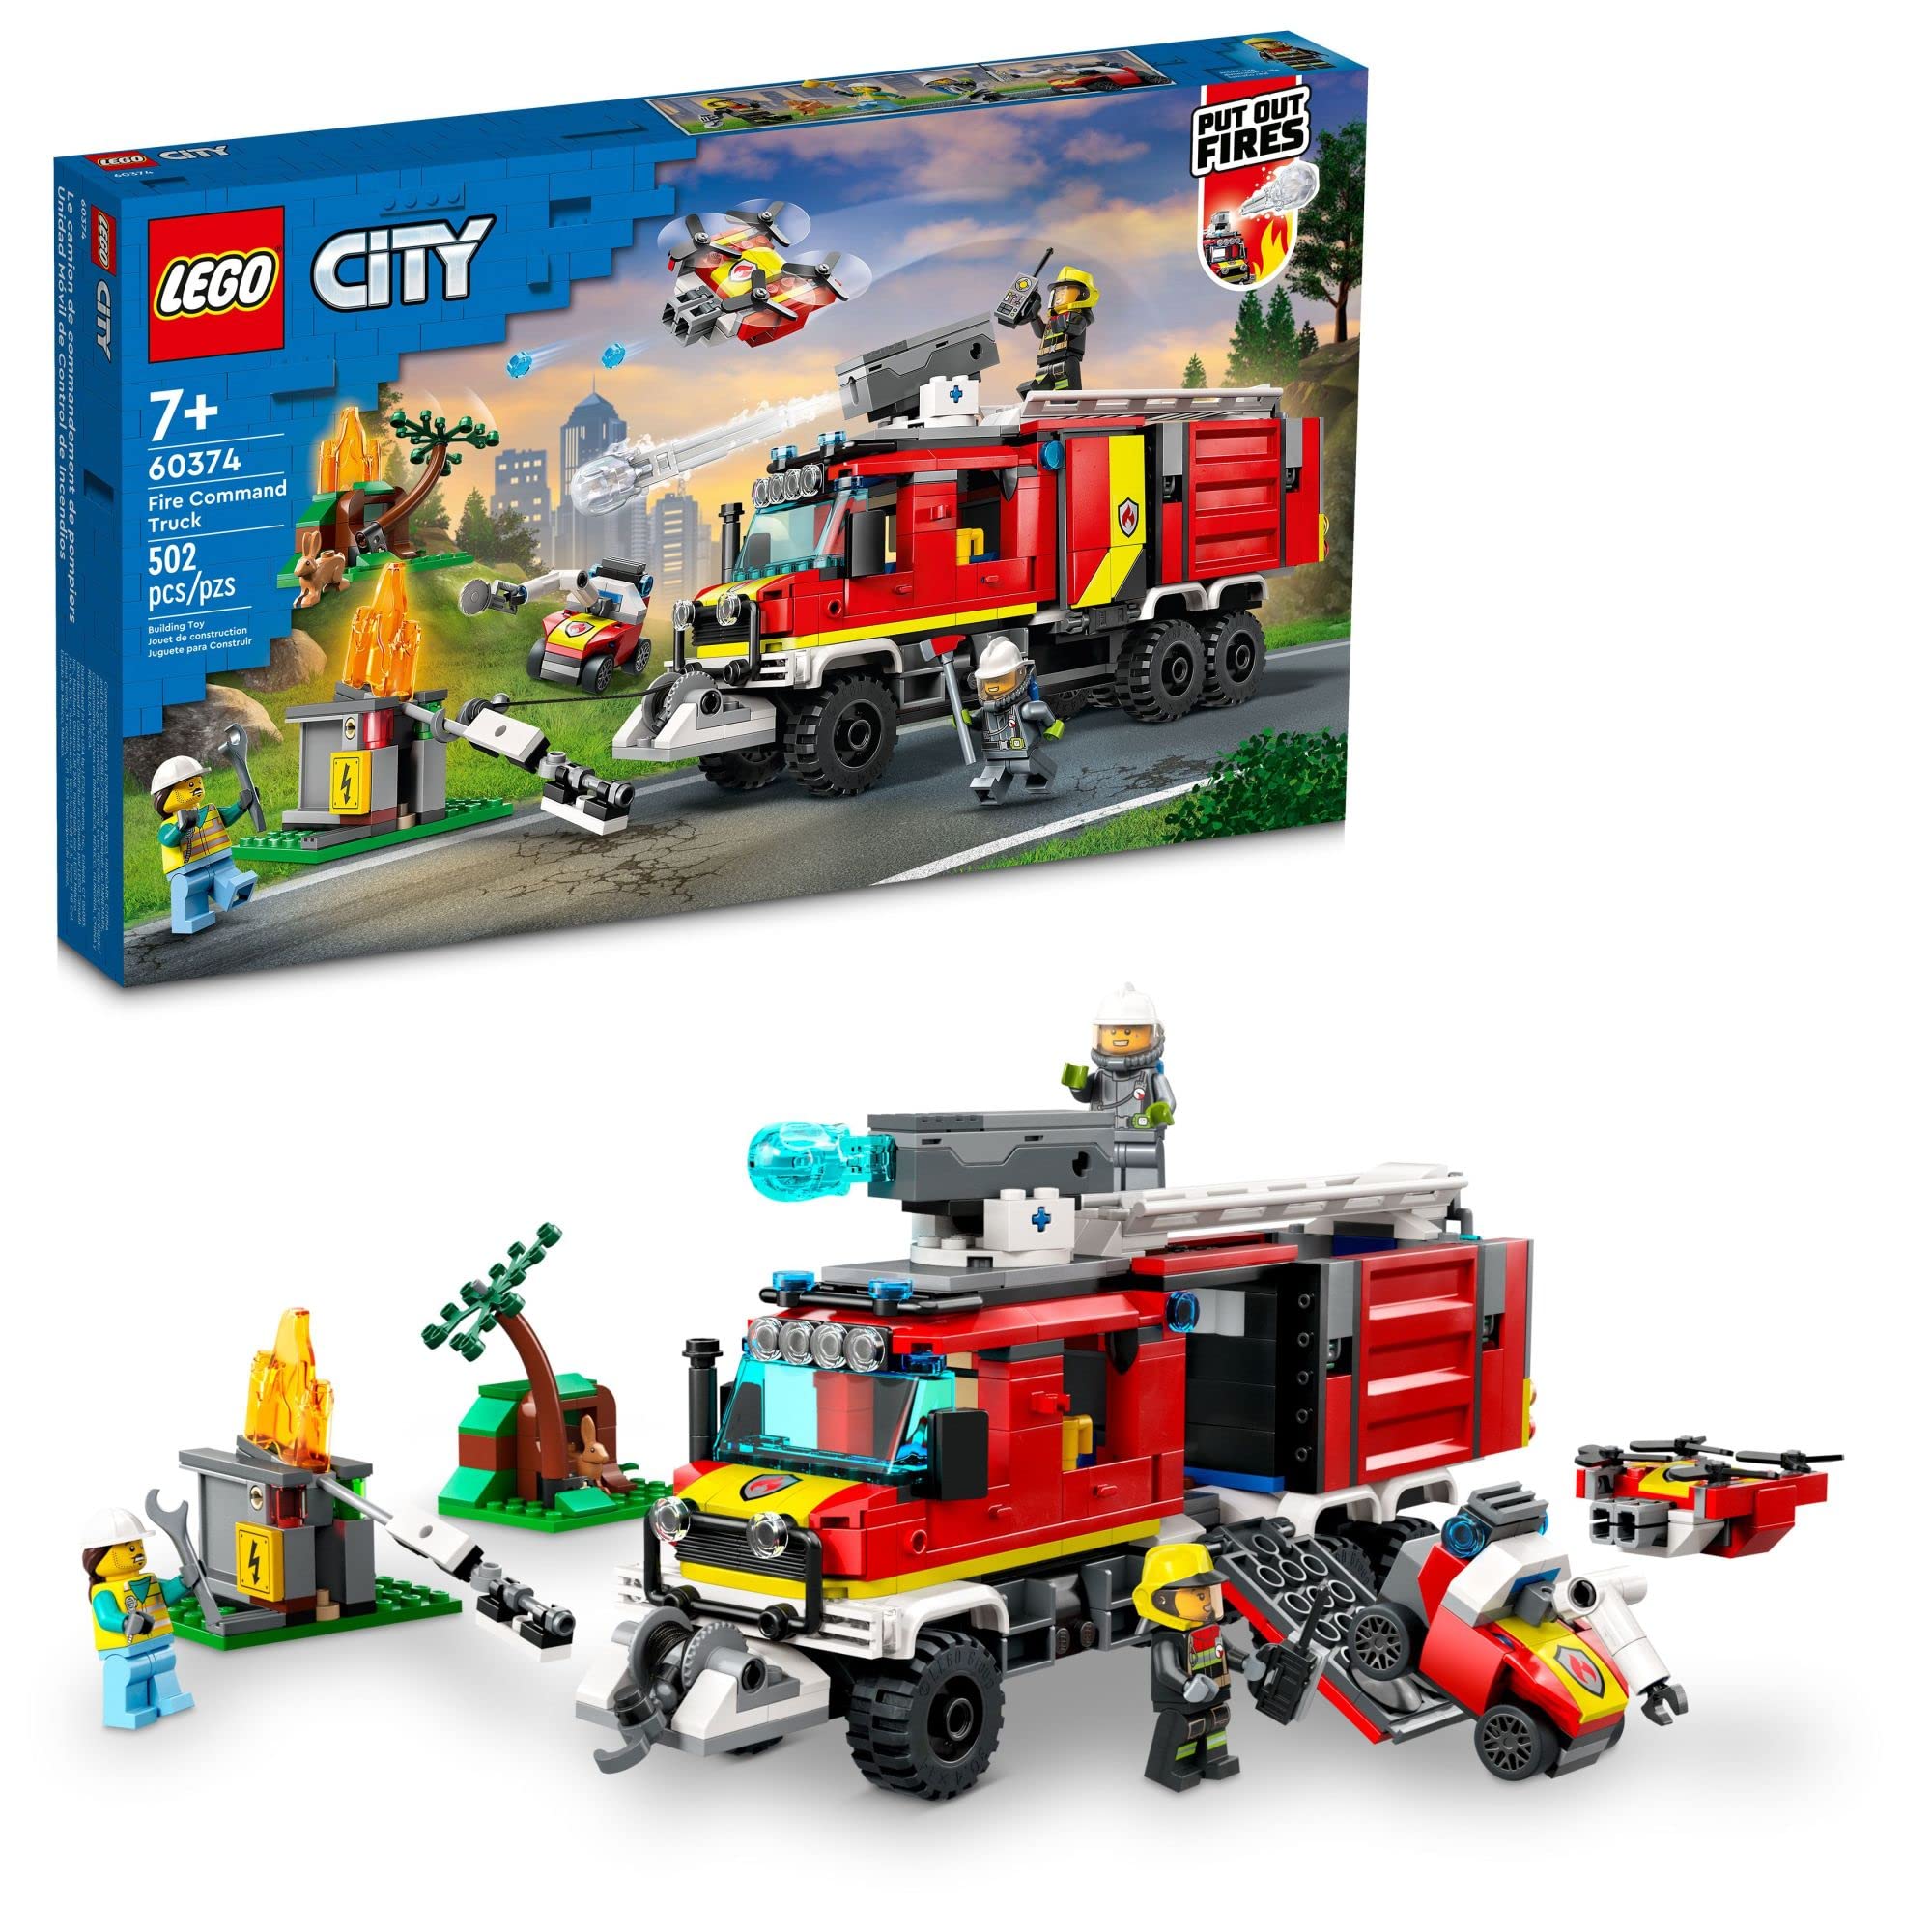 LEGO City Fire Command Unit 60374, Rescue Fire Engine Toy Set, Ultramodern Truck with Land and Air Drones, Emergency Vehicle Toys for Kids Ages 6 Plus